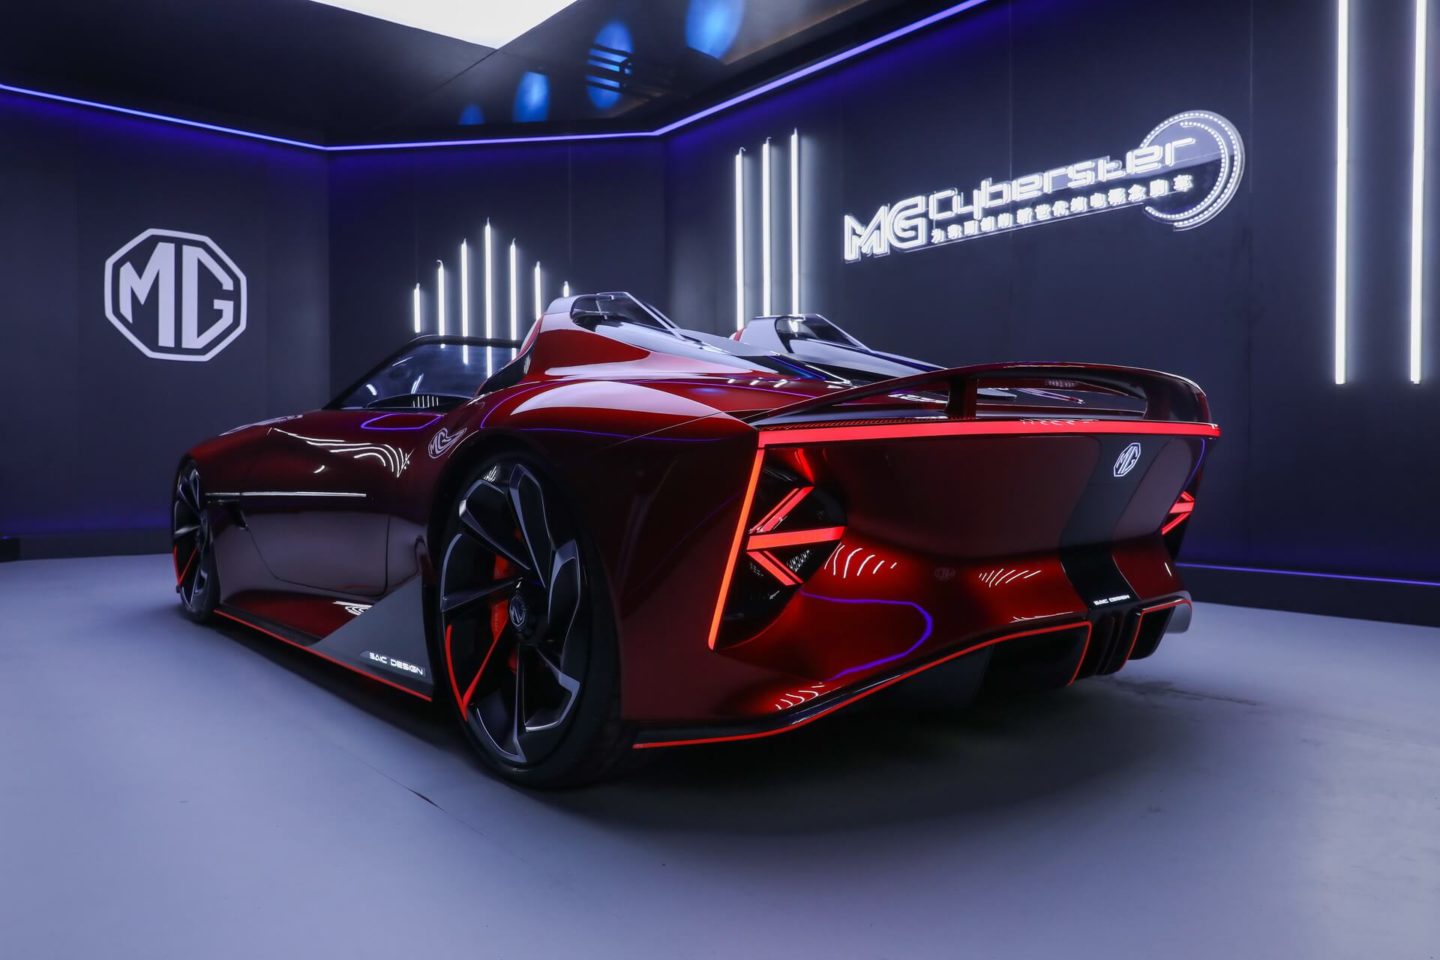 MG Cyberster Roadster Concept